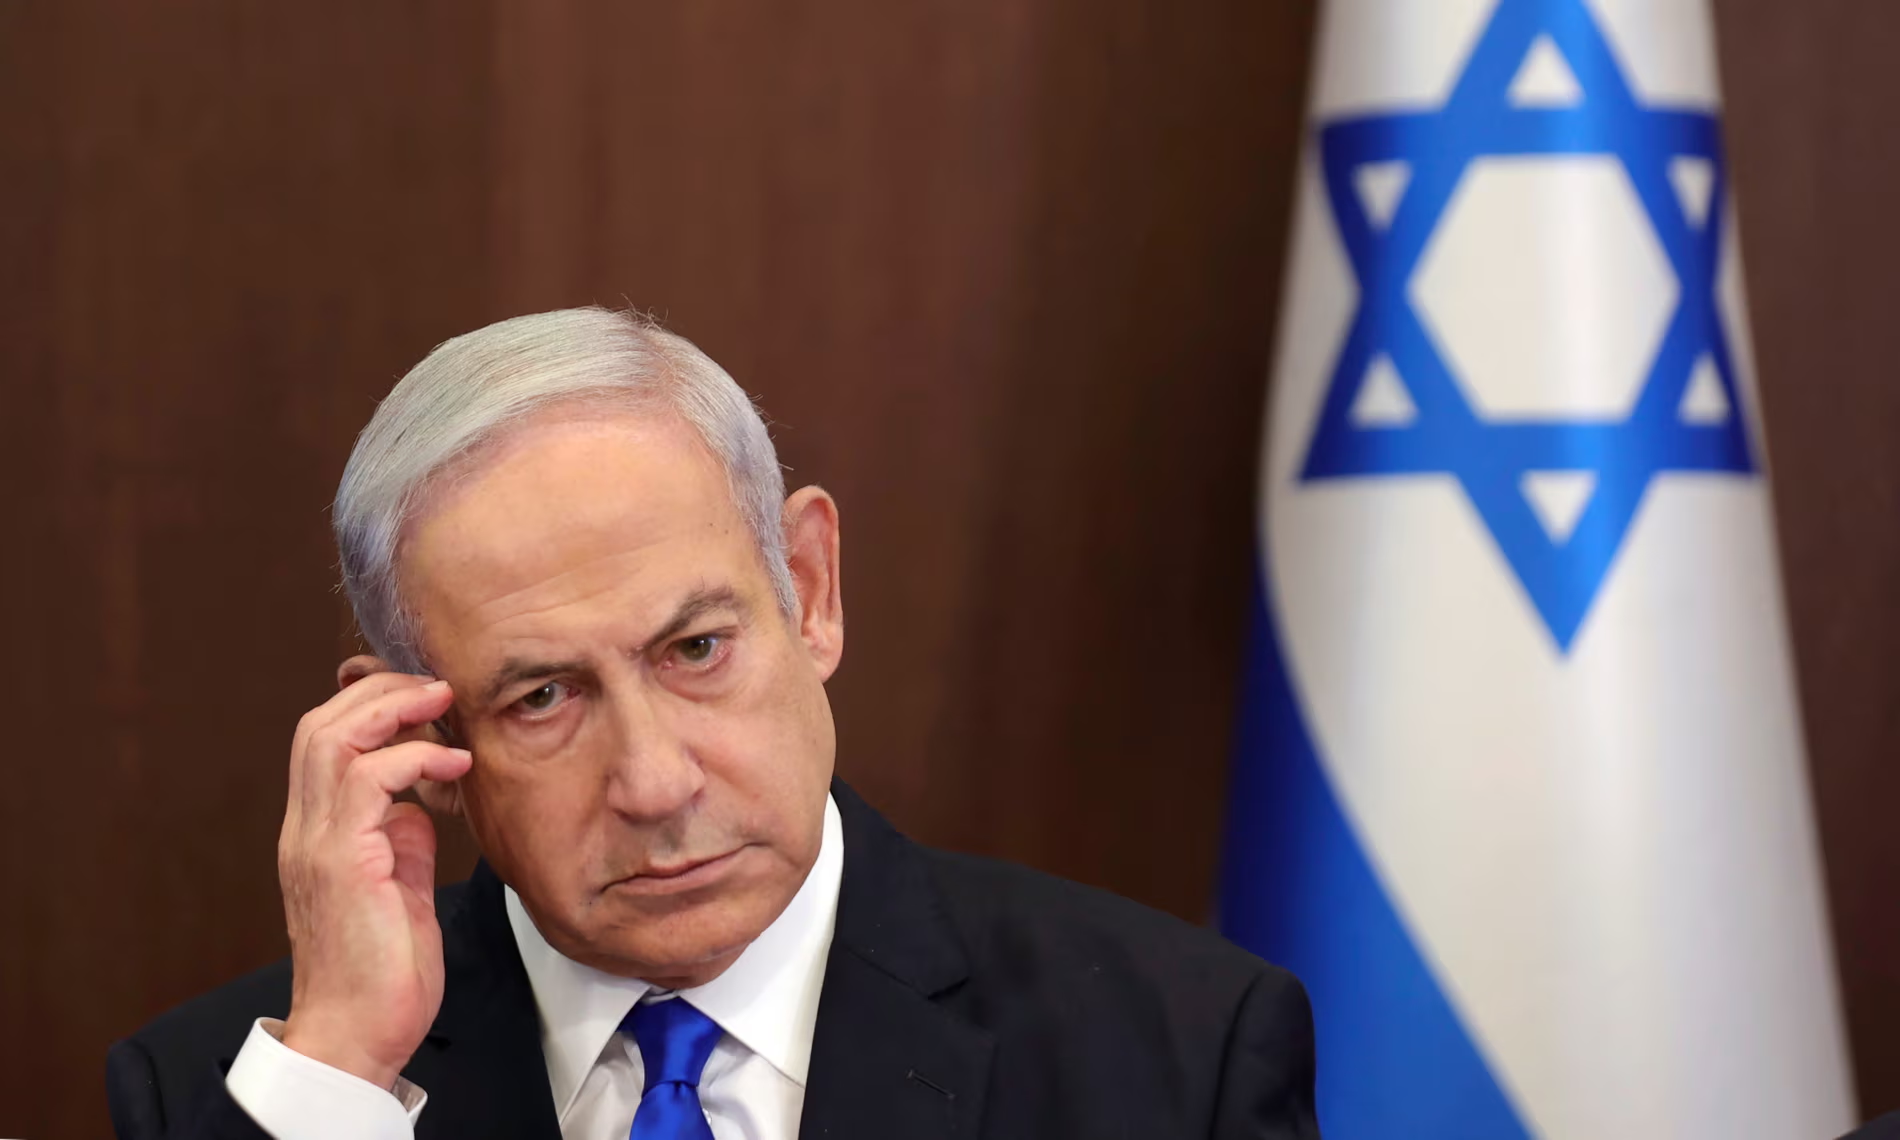 Israel's opposition leader urges Netanyahu to accept ceasefire proposal